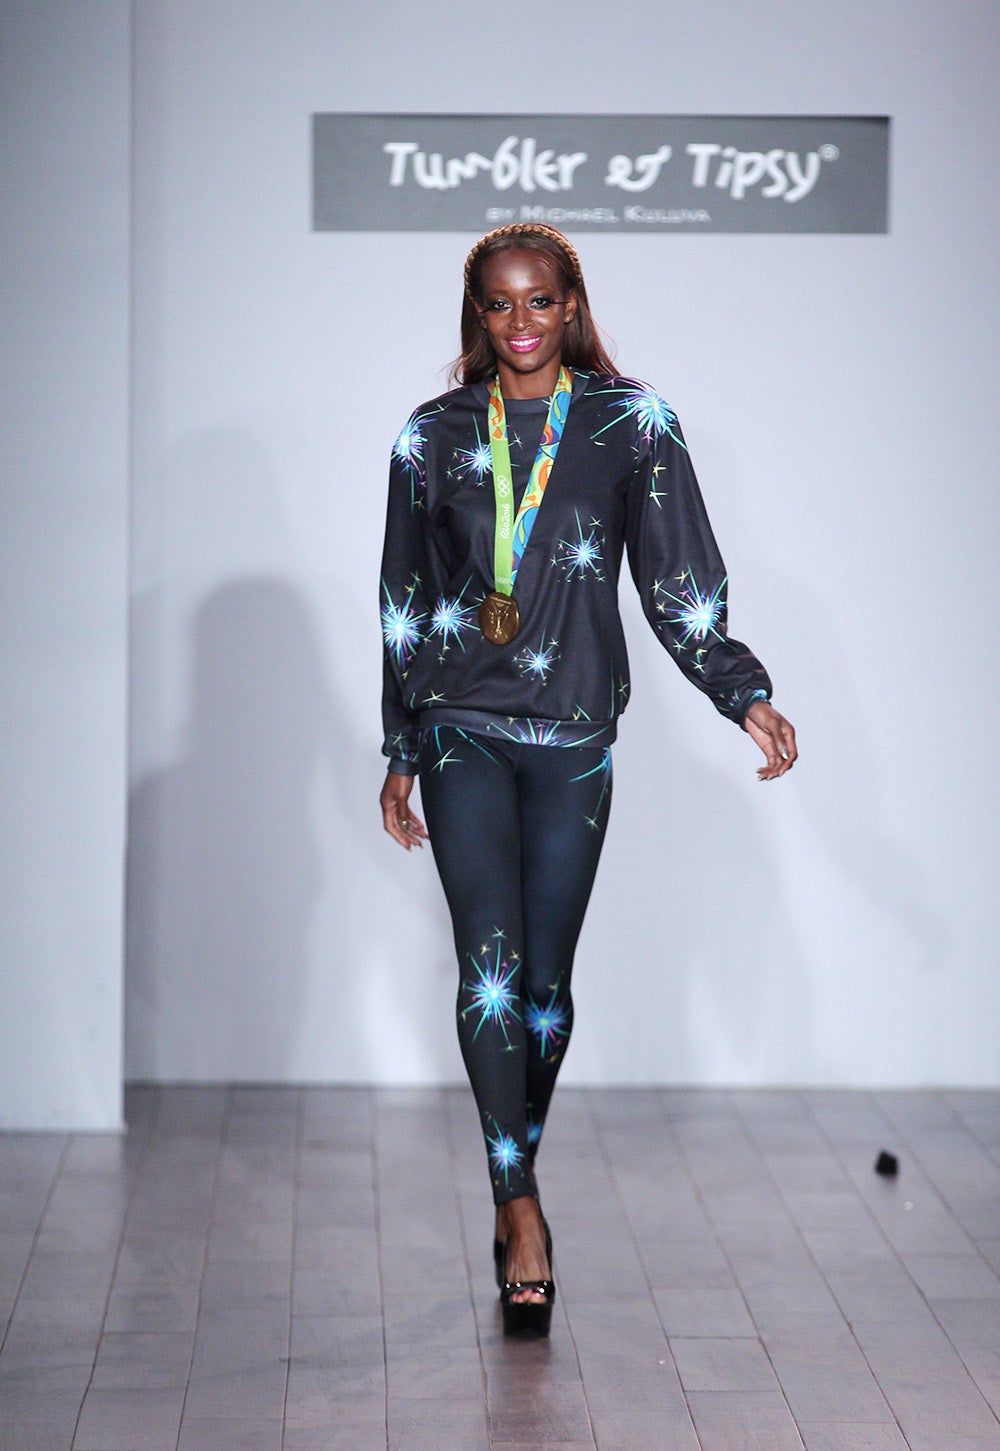 Your Fave Olympic Stars Have Taken Over Fashion Week
